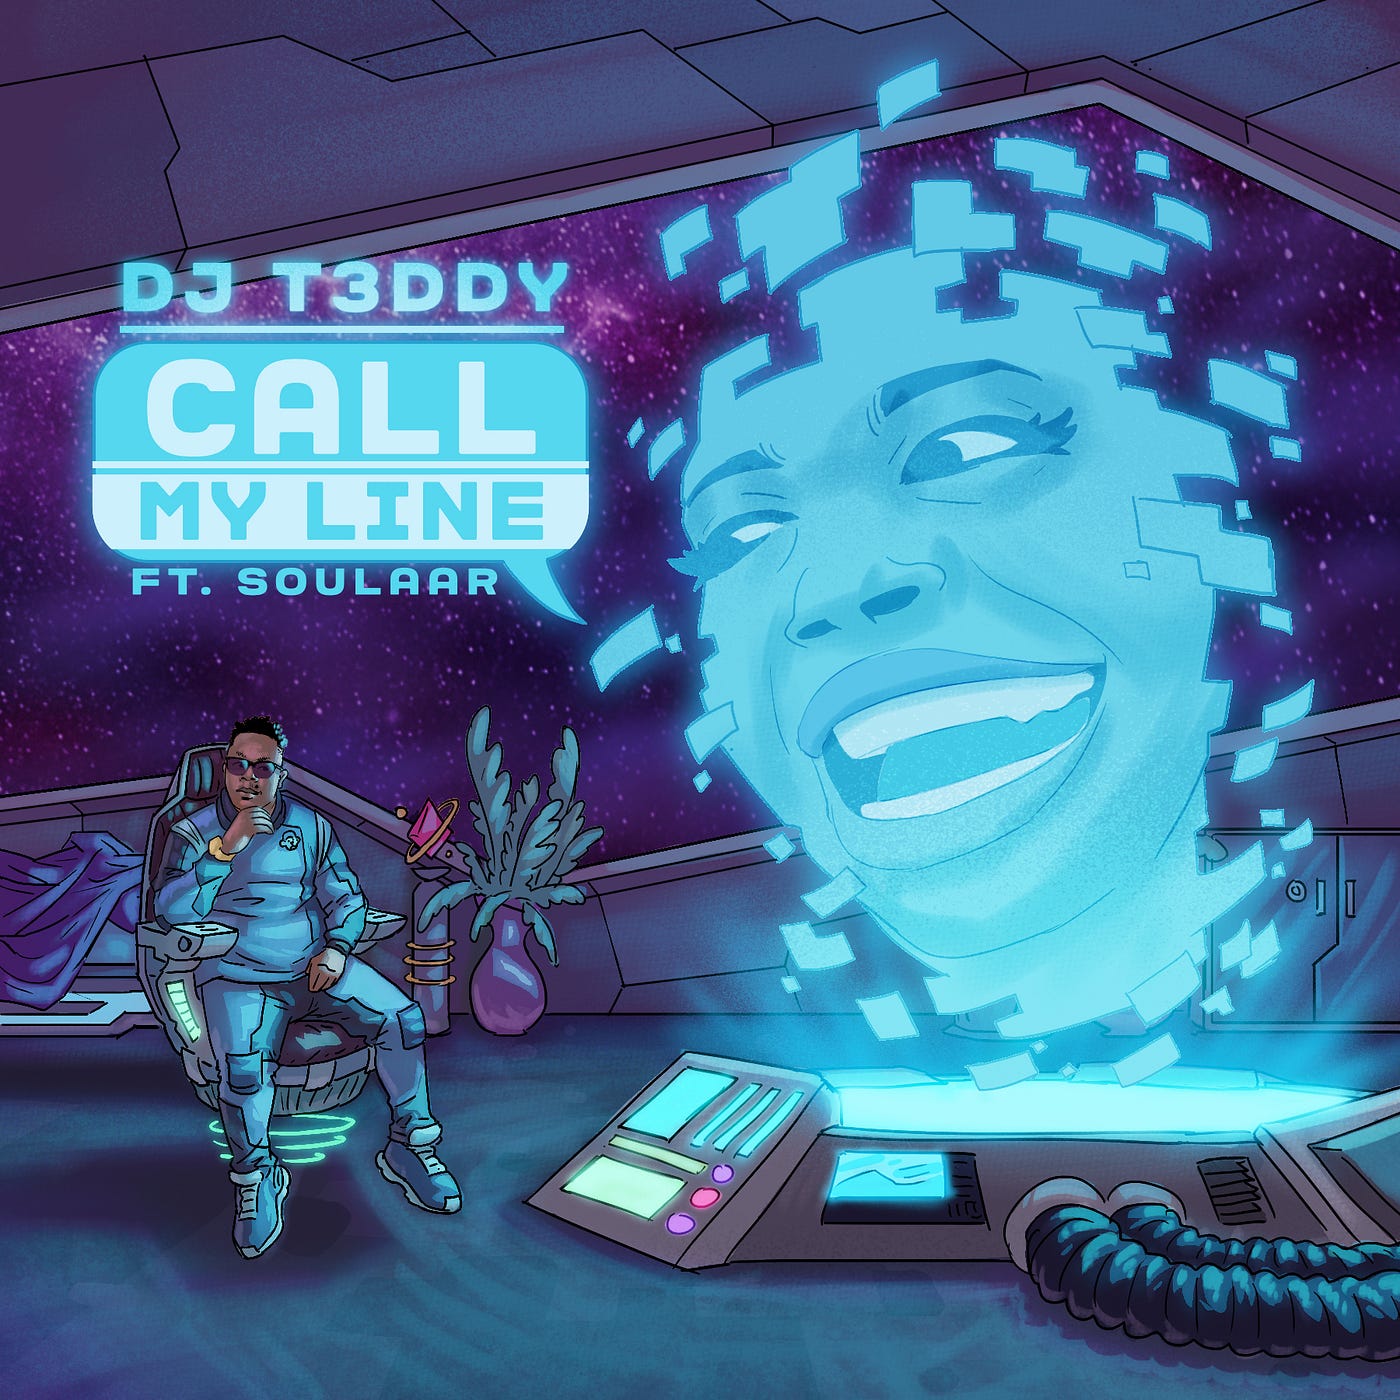 WE TOOK A T3DDY TO THE METAVERSE. Sometime in 2022, I came across